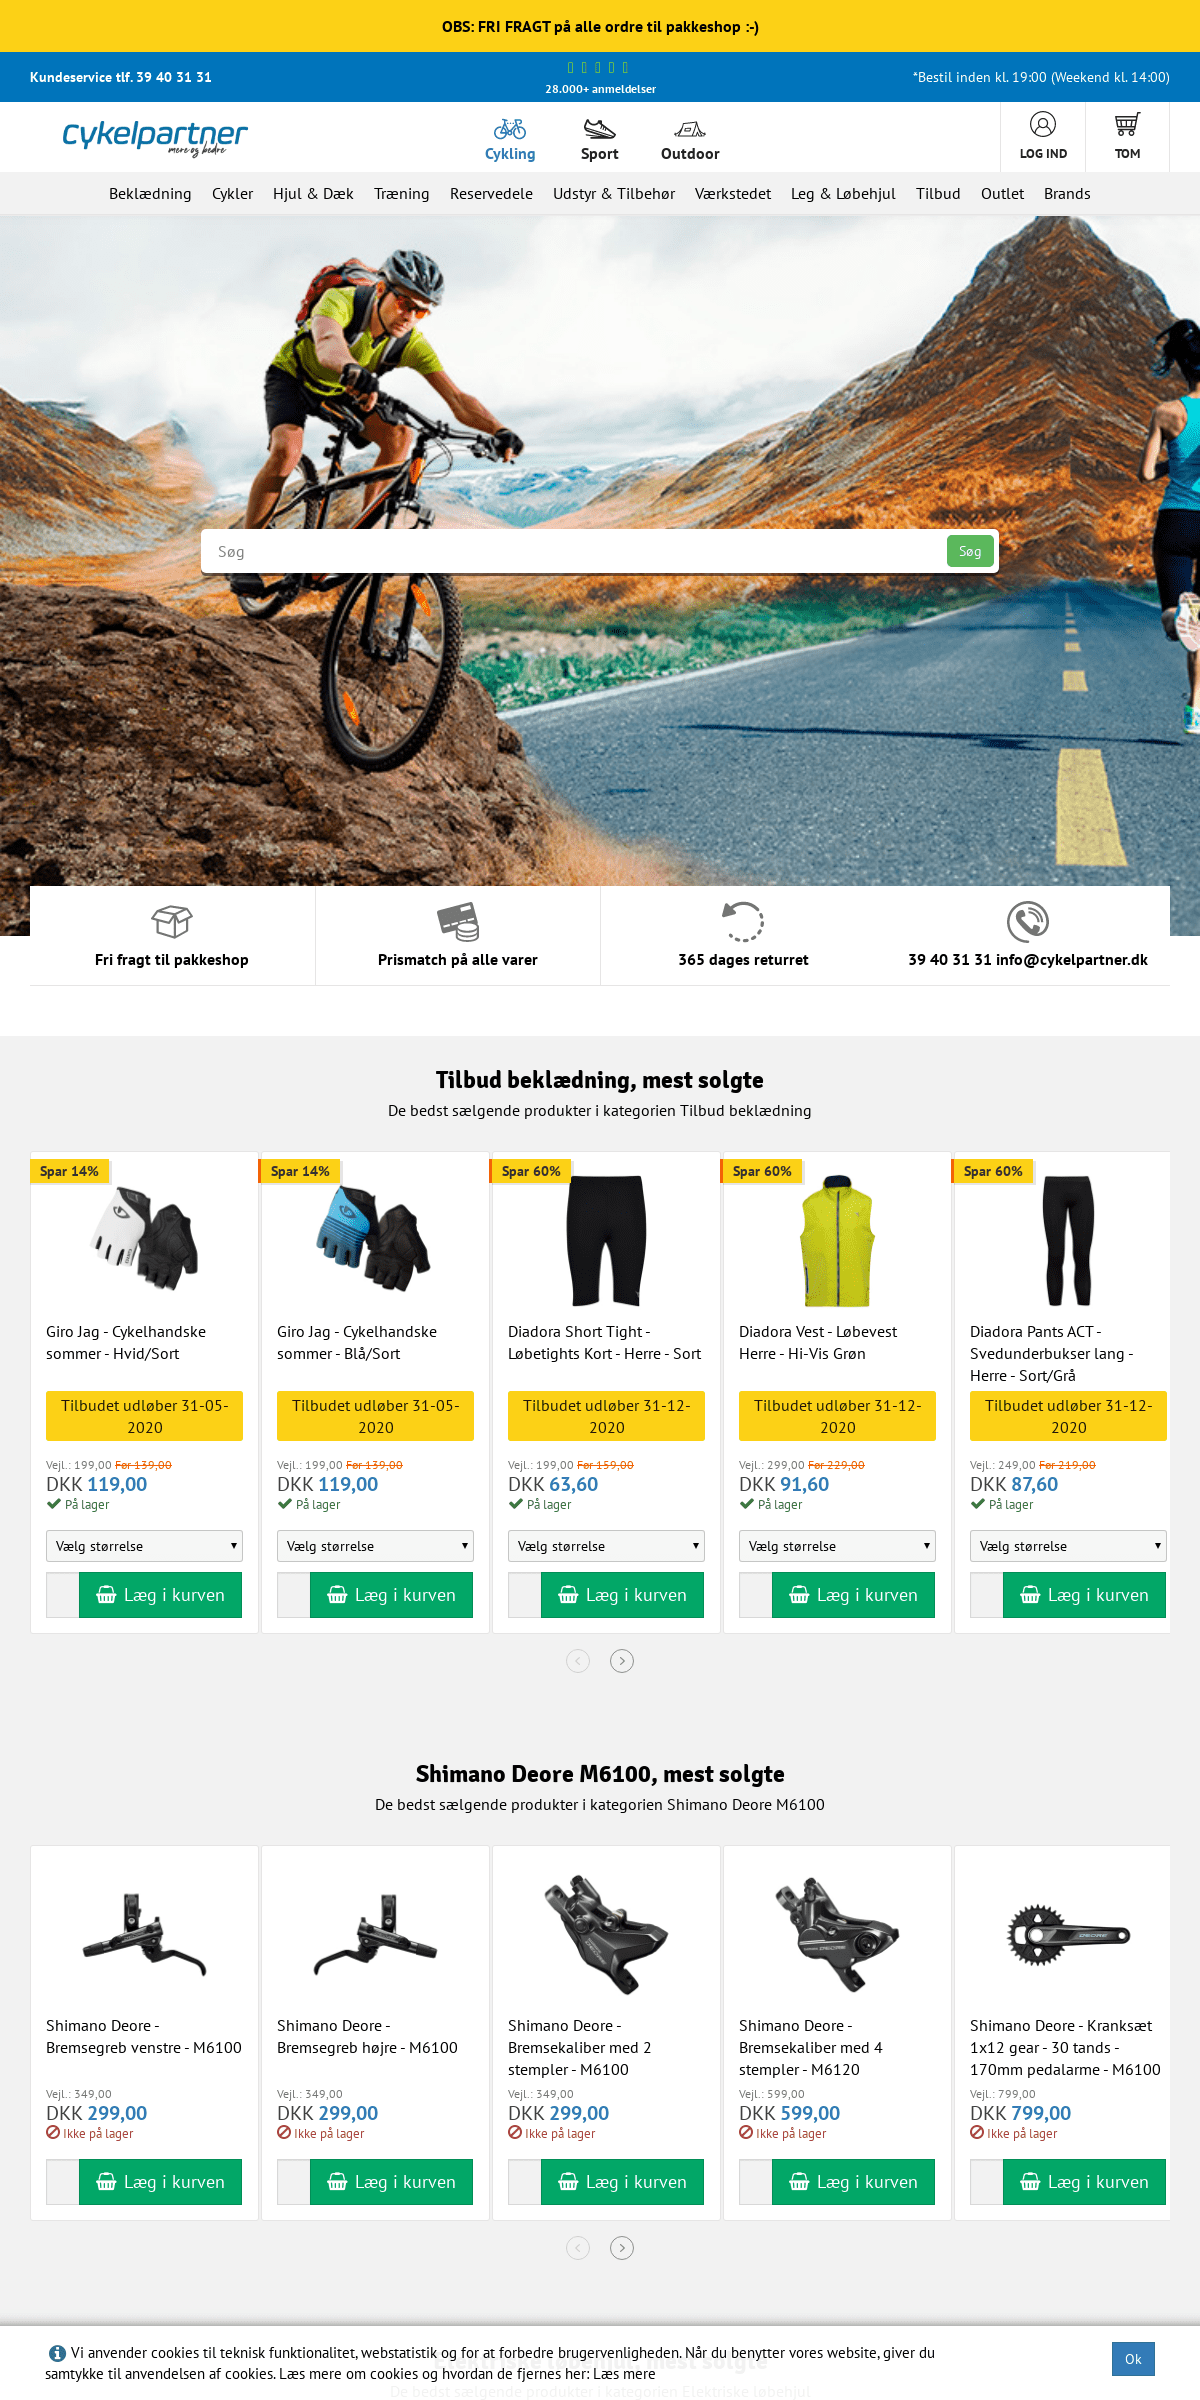 A complete backup of cykelpartner.dk